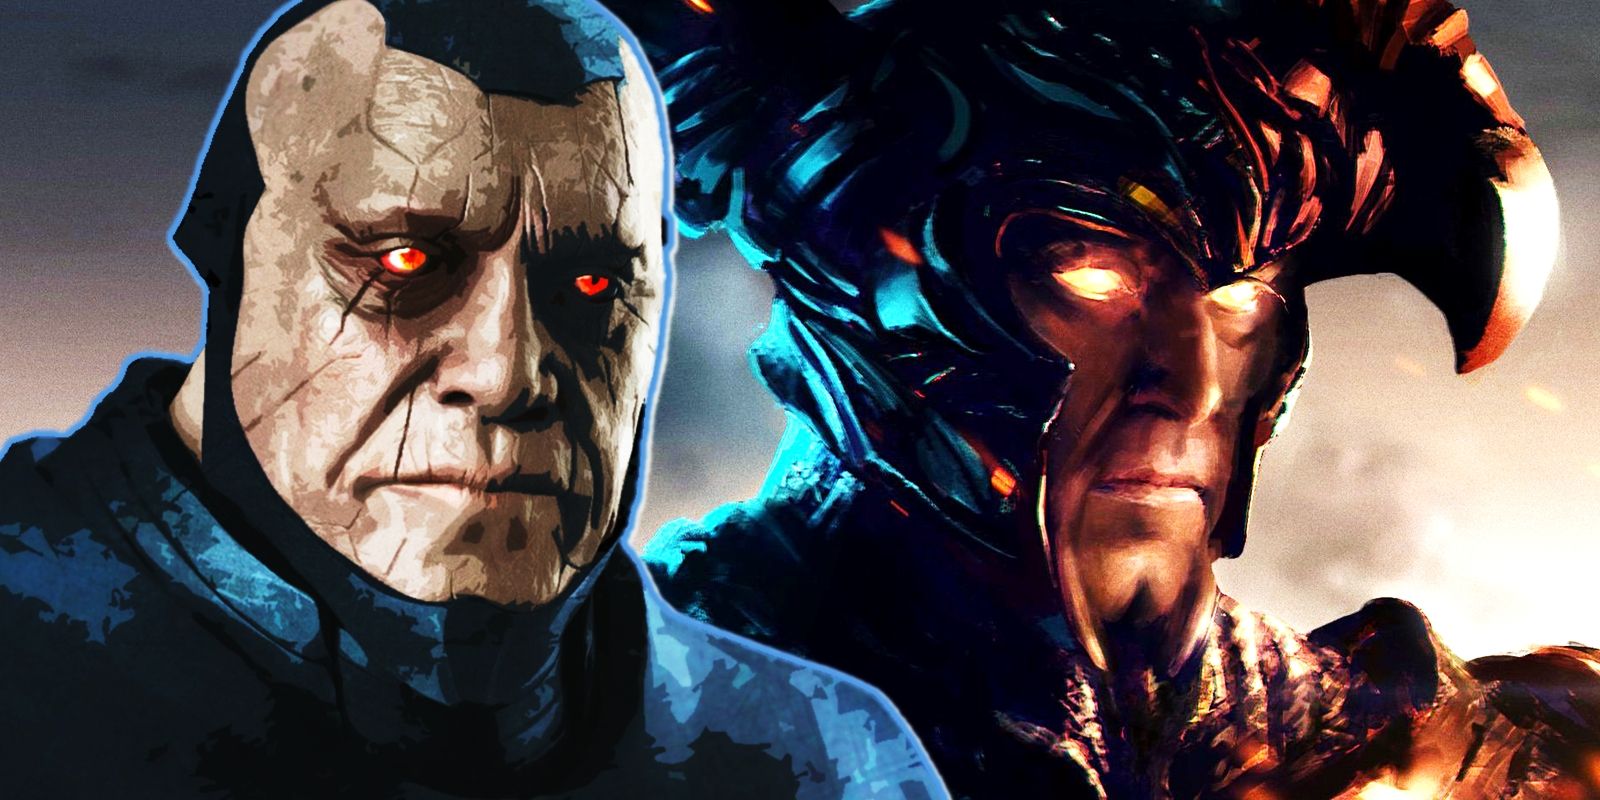 Darkseid, Steppenwolf have a ‘complicated relationship’ in Snyder’s Justice League